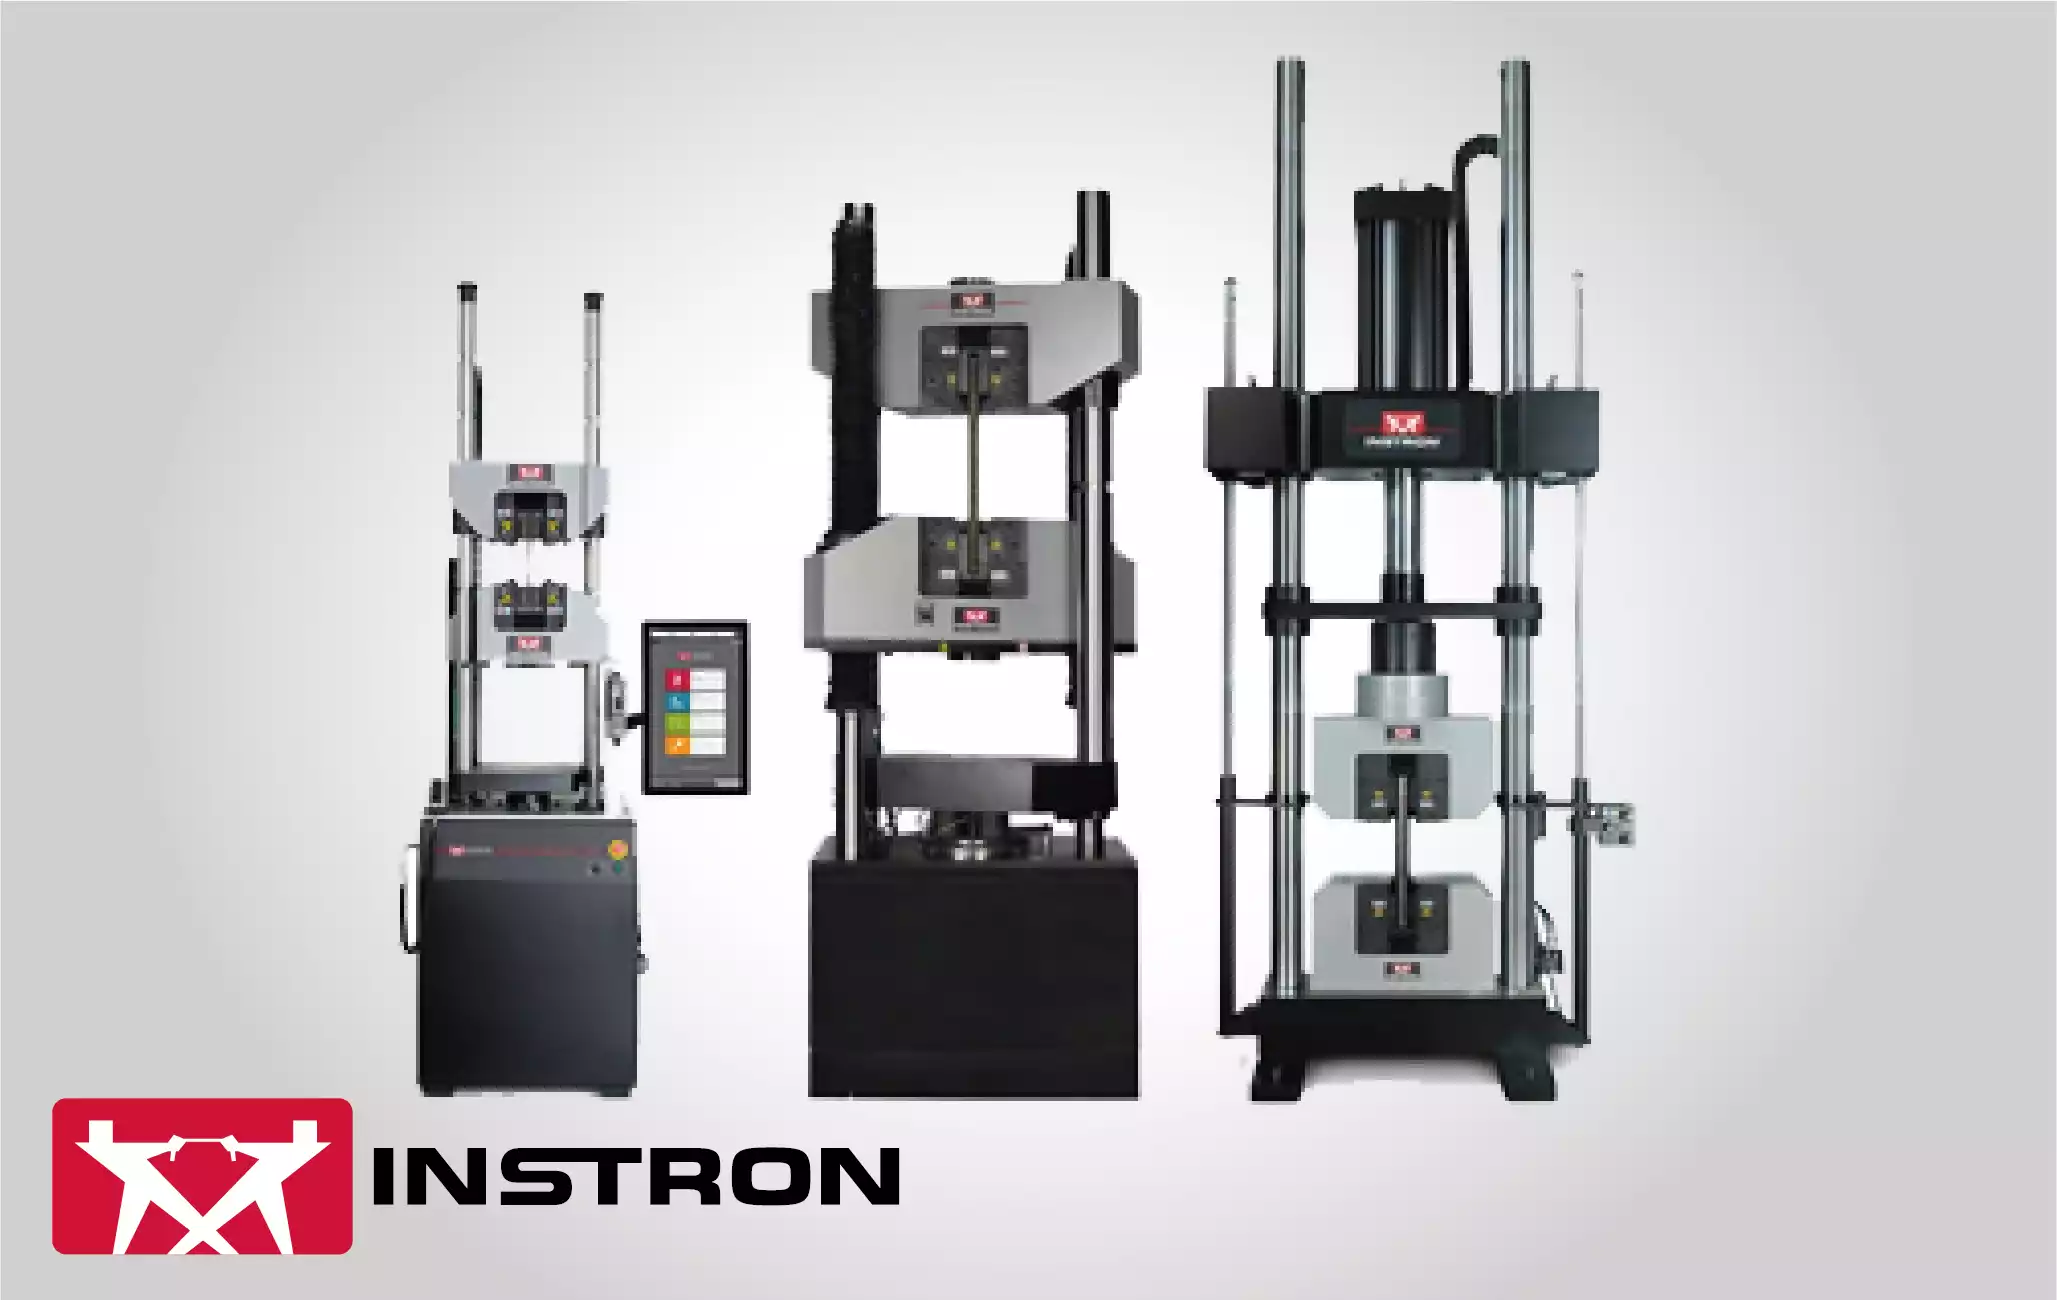 Instron Industrial Universal Testing Systems up to 2000 kN